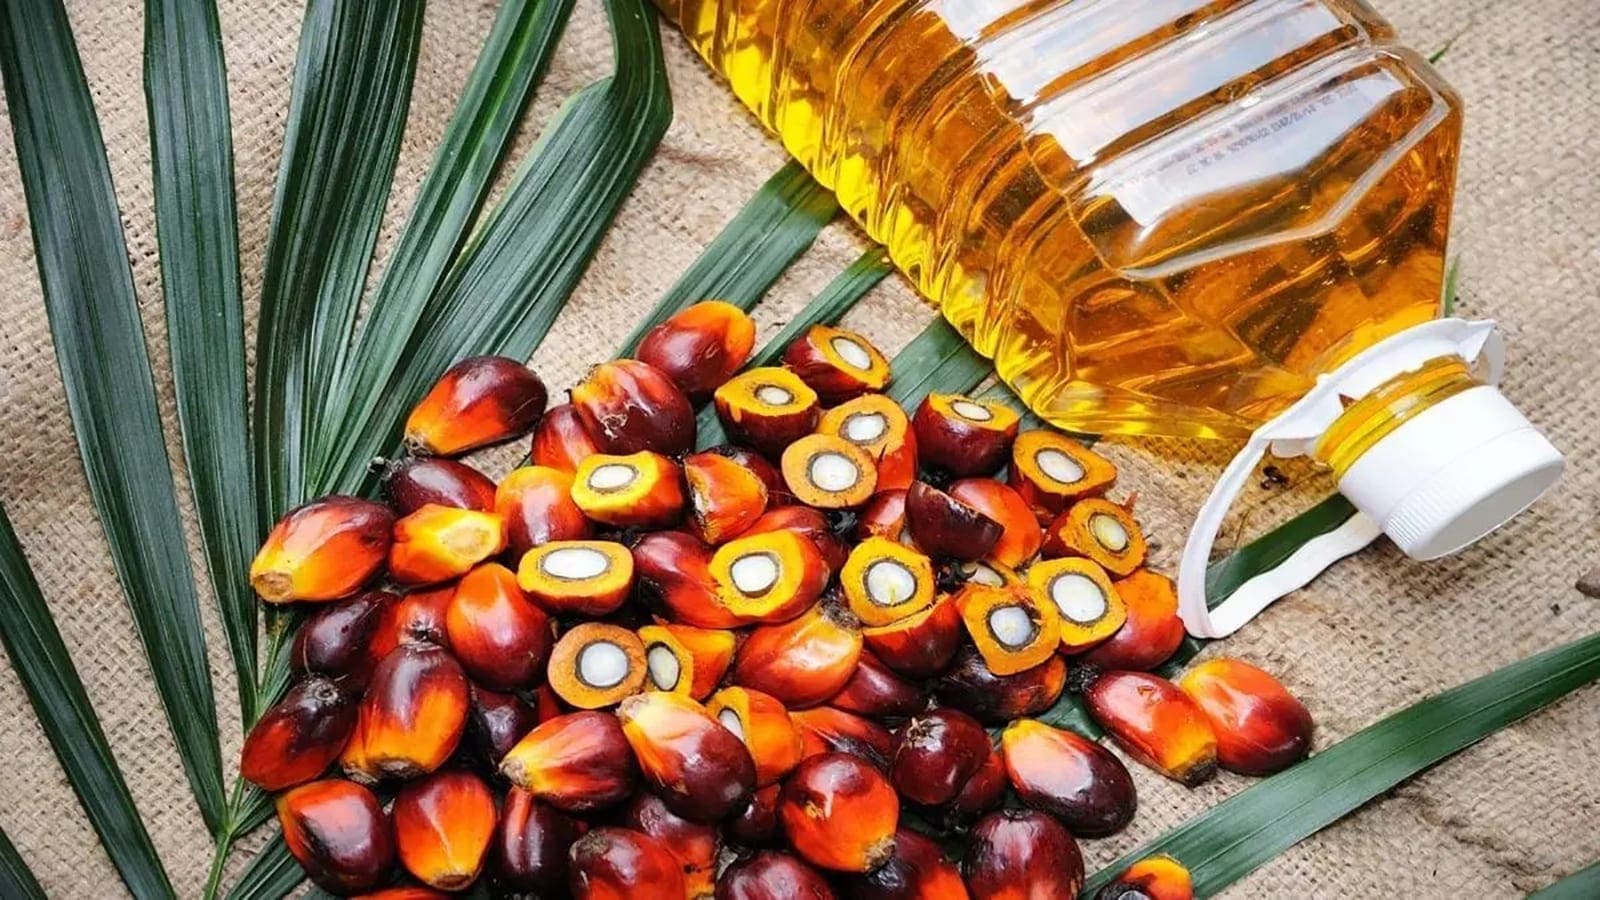 Palm oil sector in Cameroon seeks to meet growing demand, reduce imports